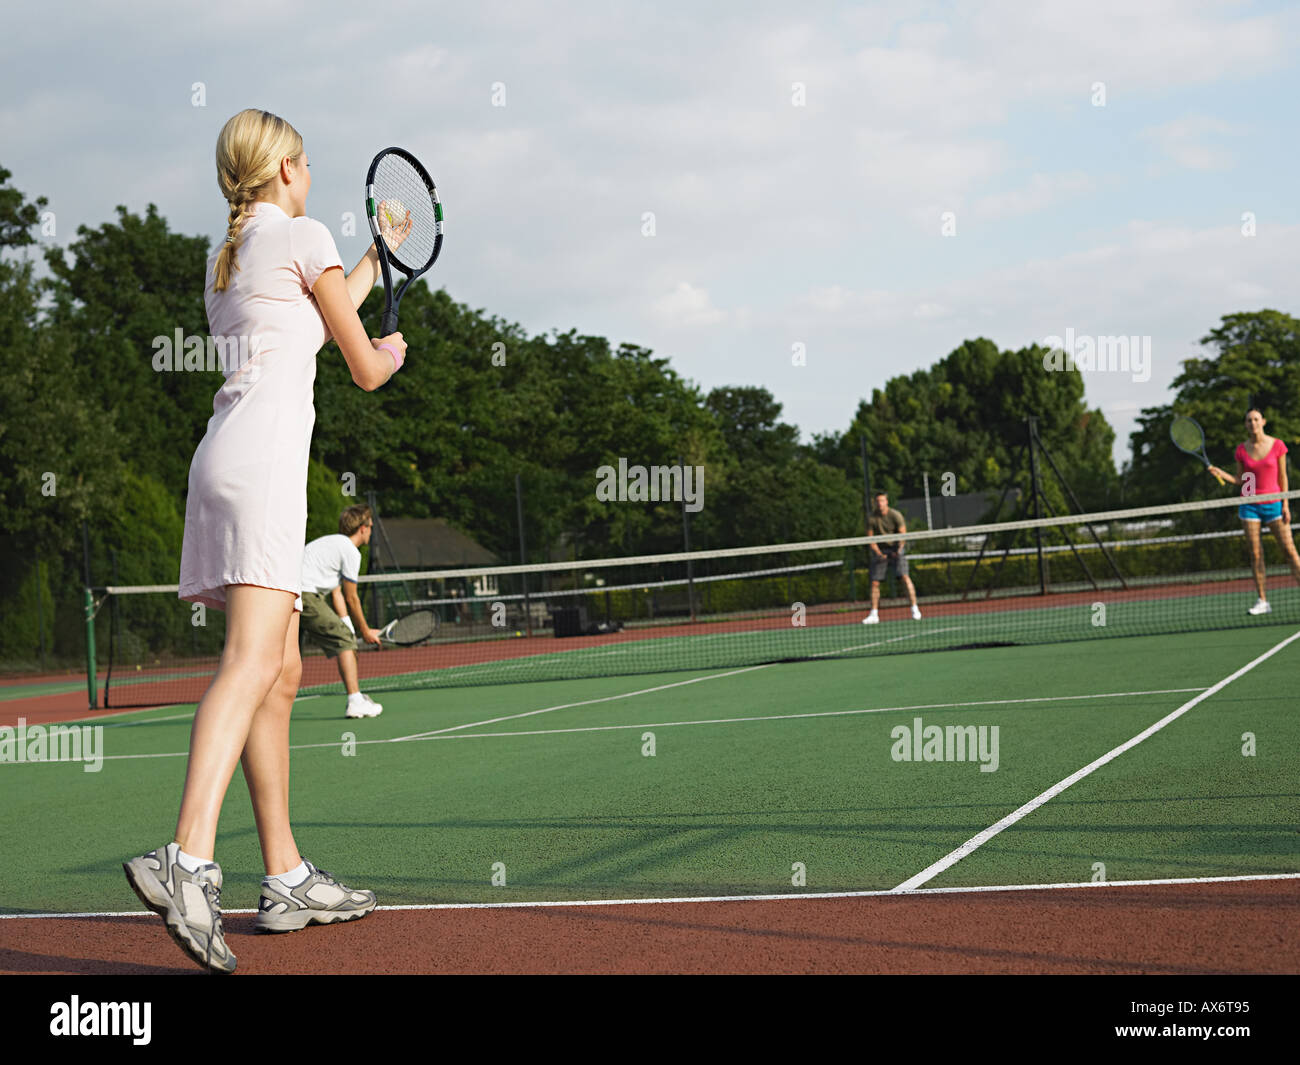 Young people playing tennis Stock Photo